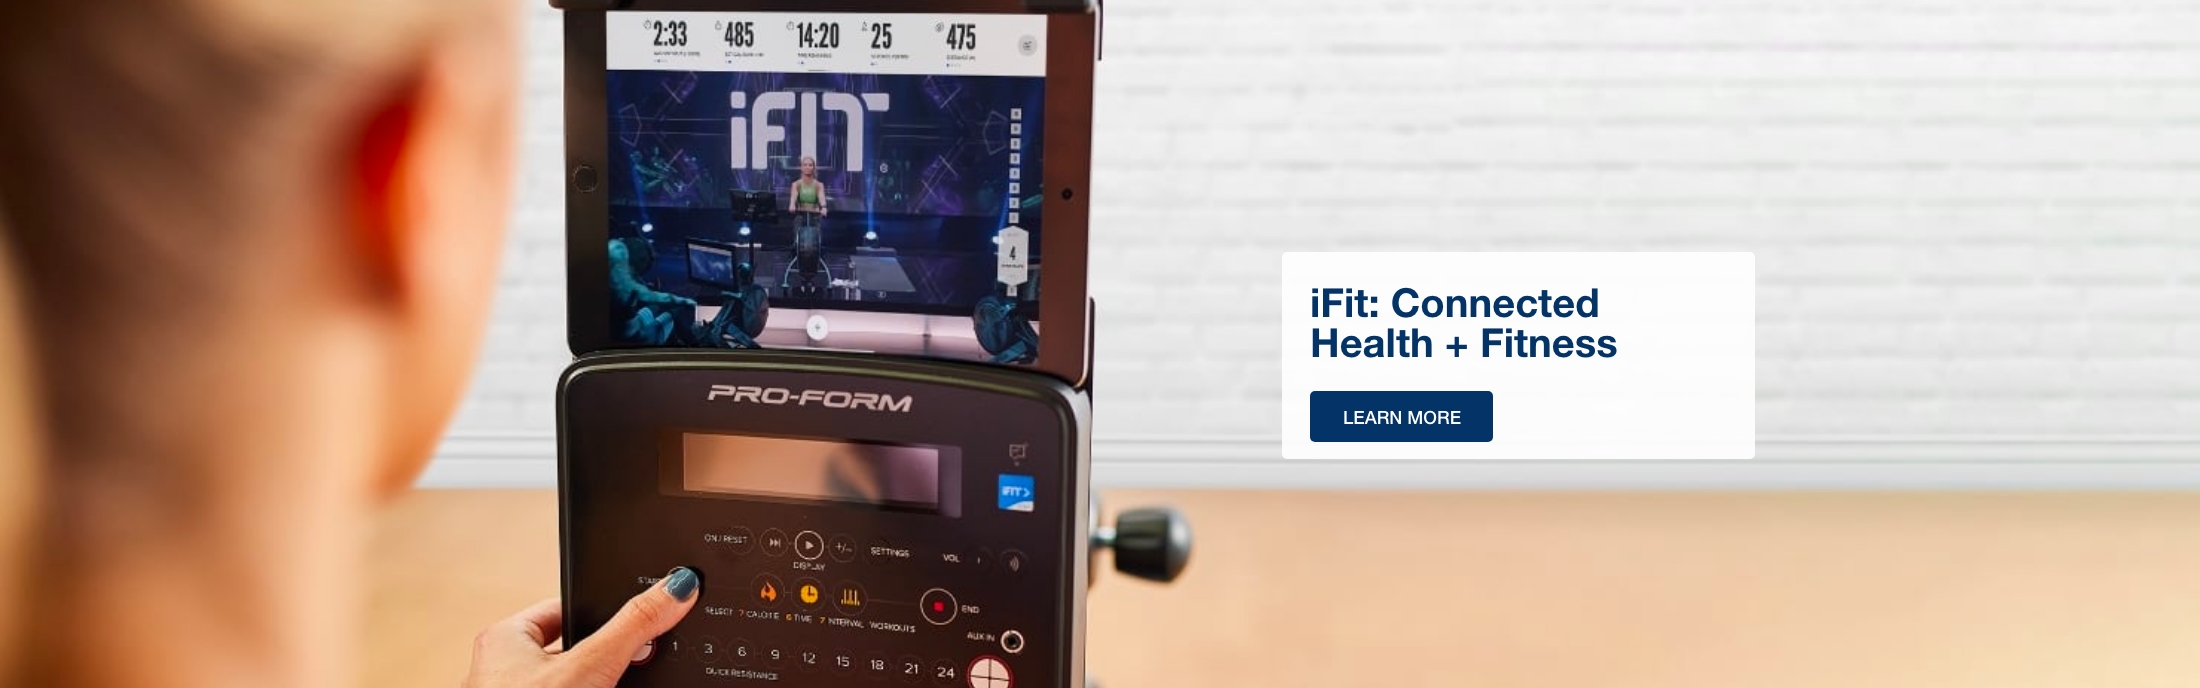 iFit: Connected Health + Fitness